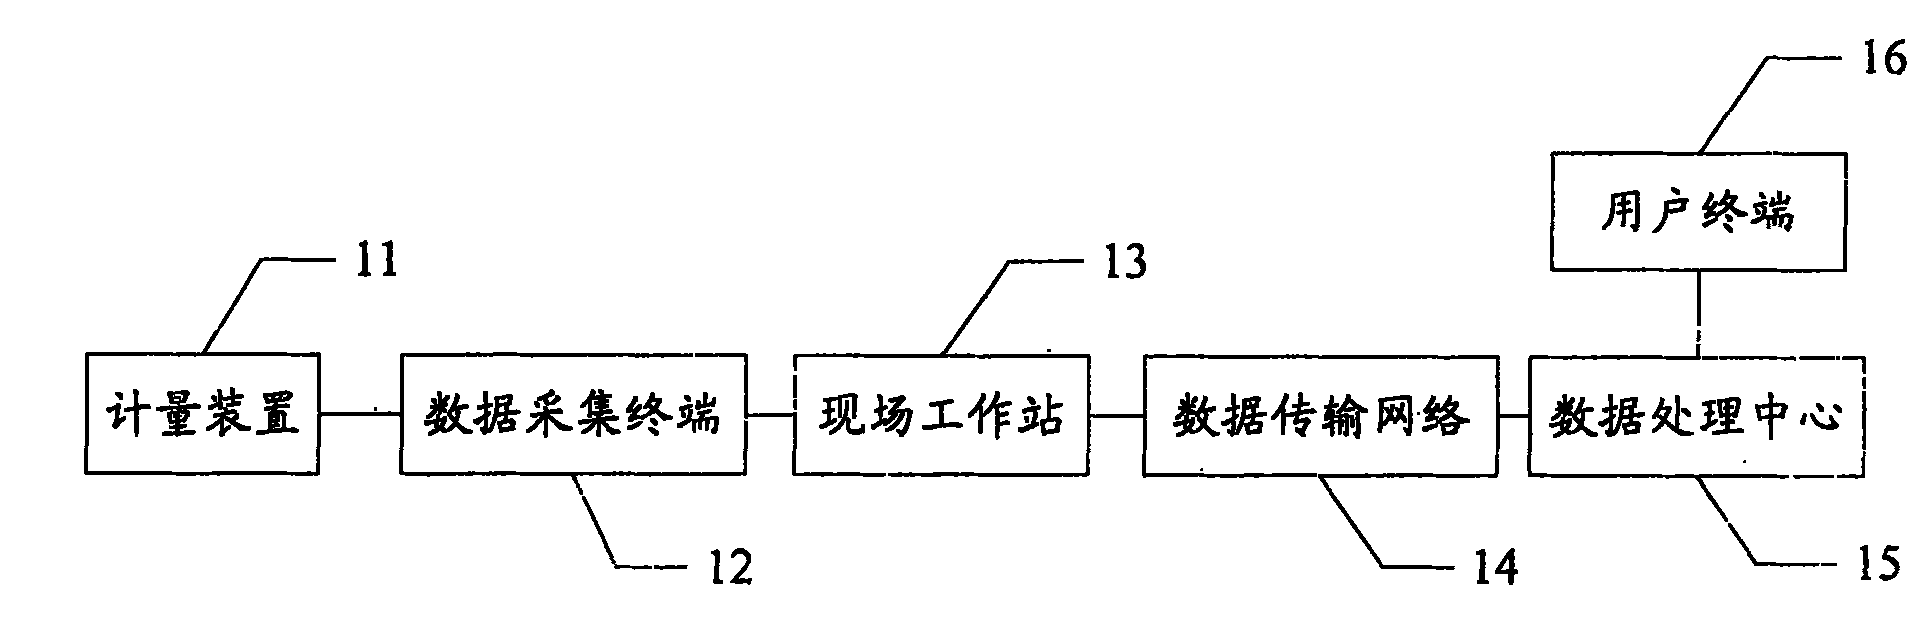 System for remotely monitoring energy consumption of central air-conditioning